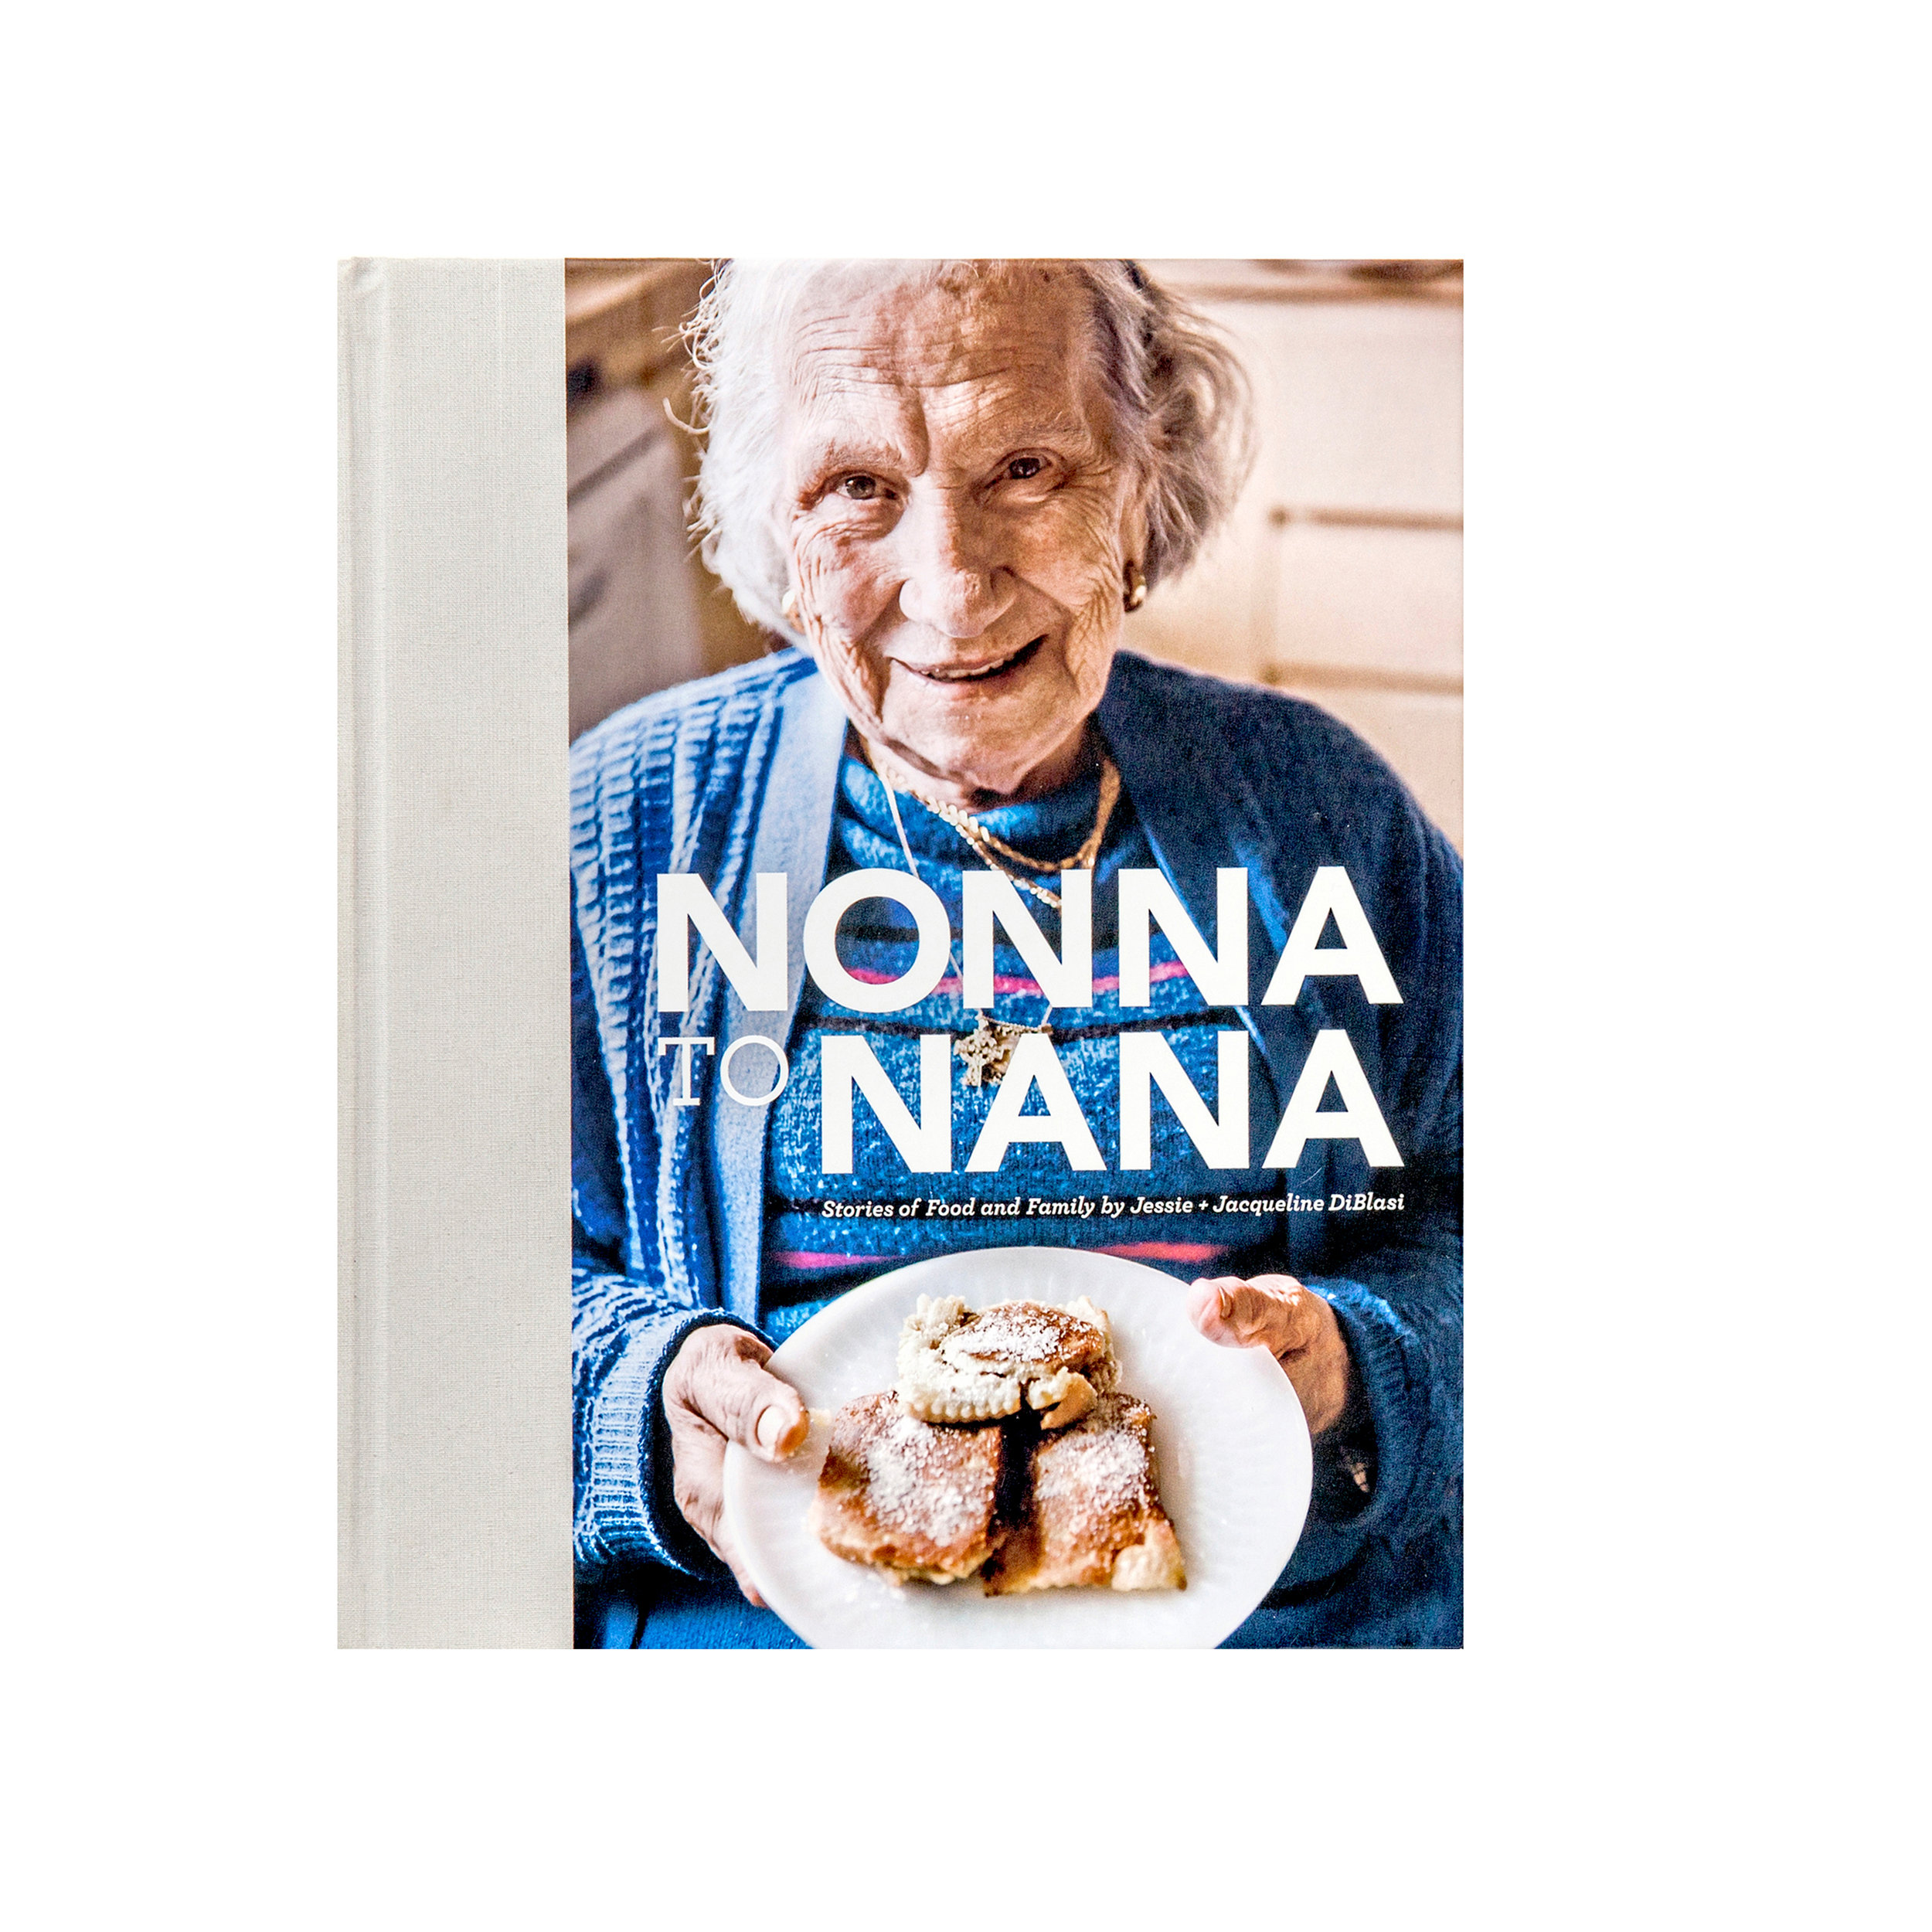   Nonna to Nana: Stories of Food and Family  is documentary style cookbook that explores the seamless connection between love and nourishment. Created by Melbourne sister duo, Jessie and Jacqueline DiBlasi (Photographer/Designer), fifteen Australian 